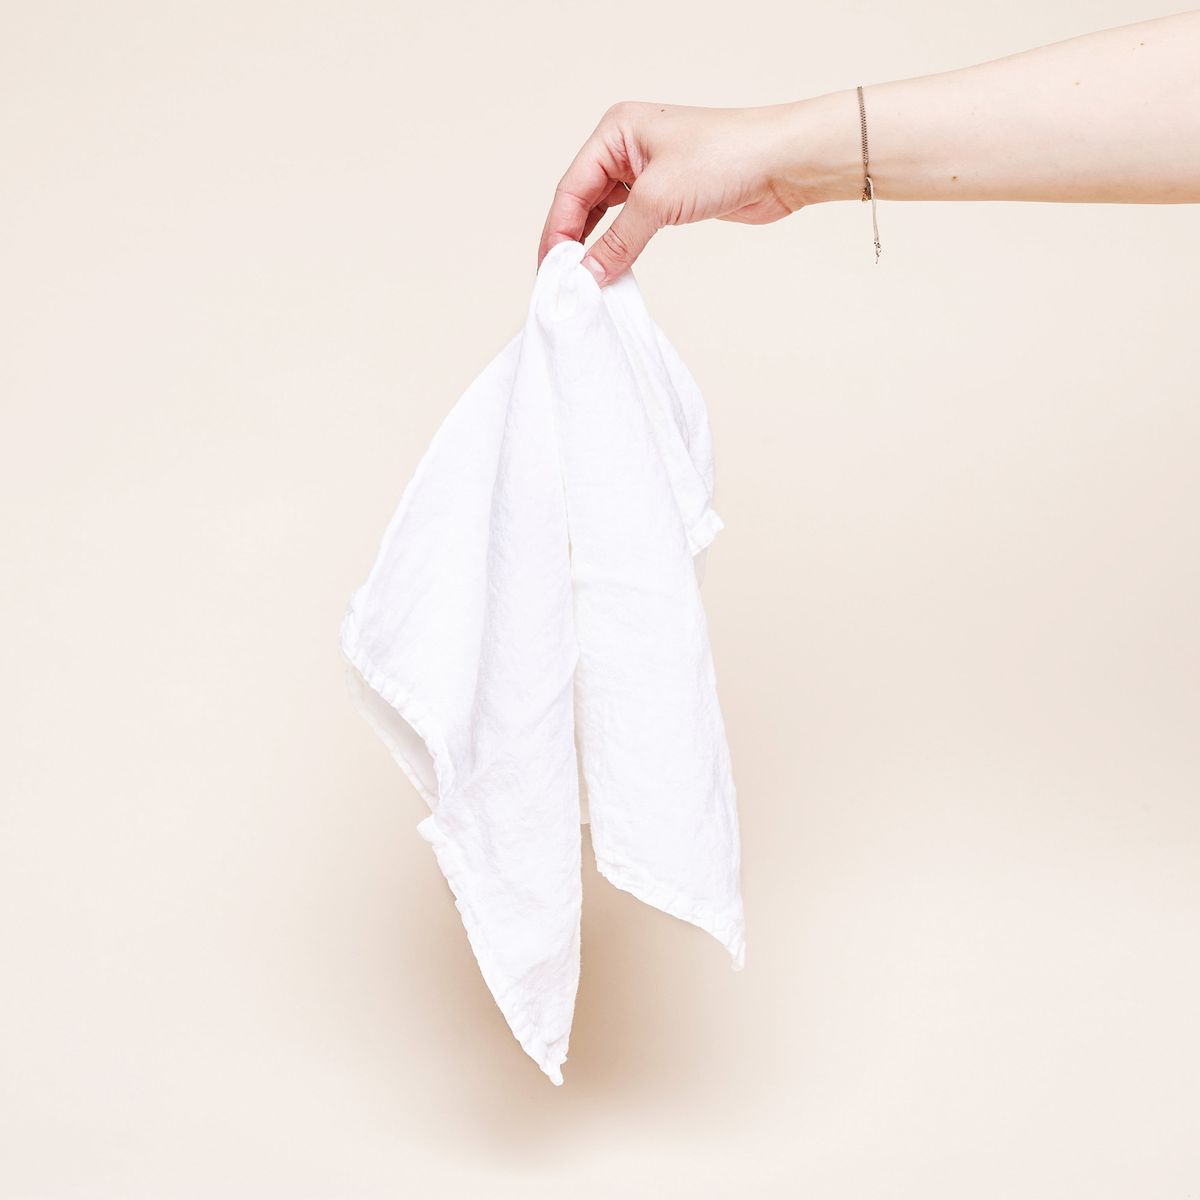 A white linen napkin held loosely by fingers